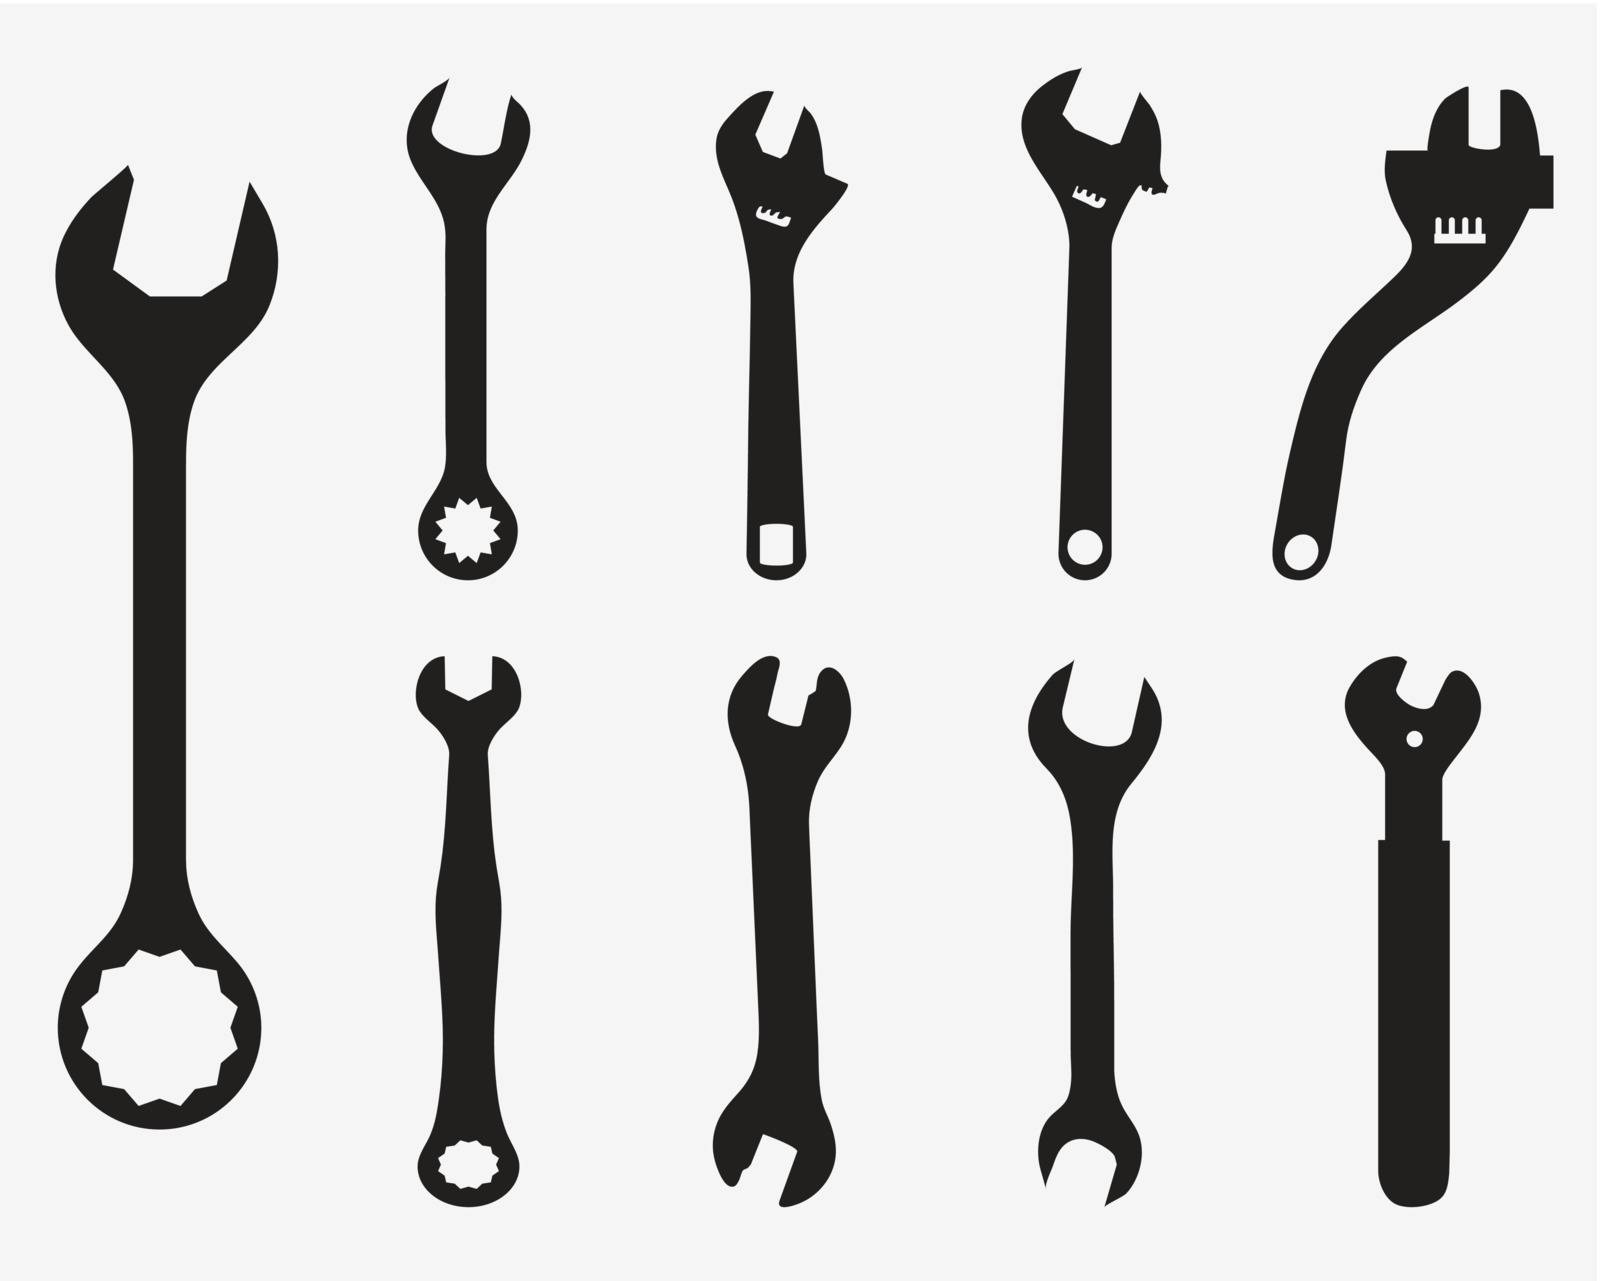 Black silhouettes of screw wrench, vector illustration